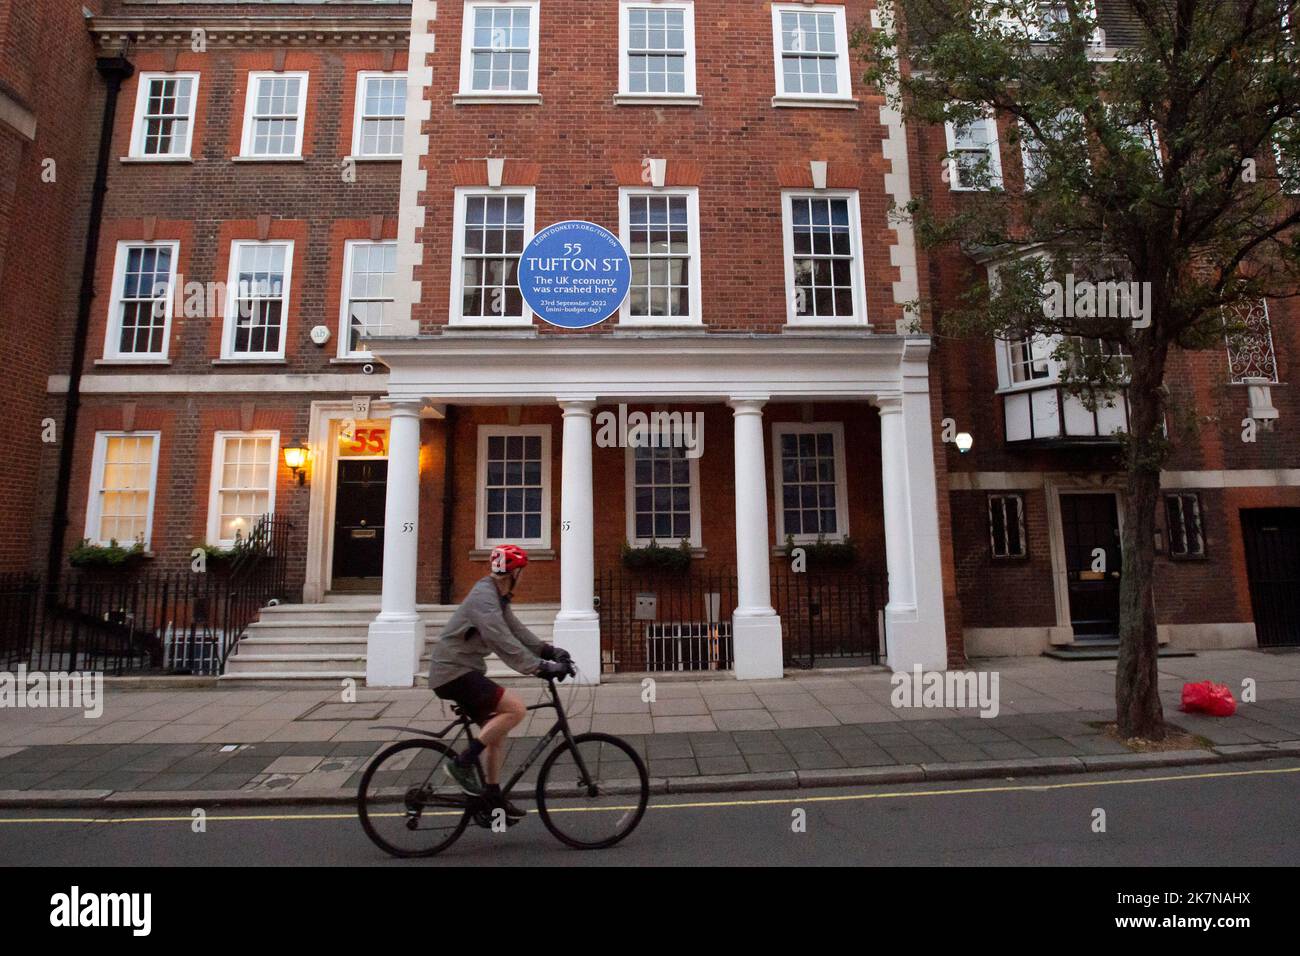 London, UK, 18 October 2022. A woman cycles past 55 Tufton Street in Westminster, where campaigners from Led By Donkeys fixed a blue plaque. The building is home to several free market groups that were instrumental in Kwarsi Kwarteng's mini budget. Credit: David Mirzoeff/Alamy Live News Stock Photo